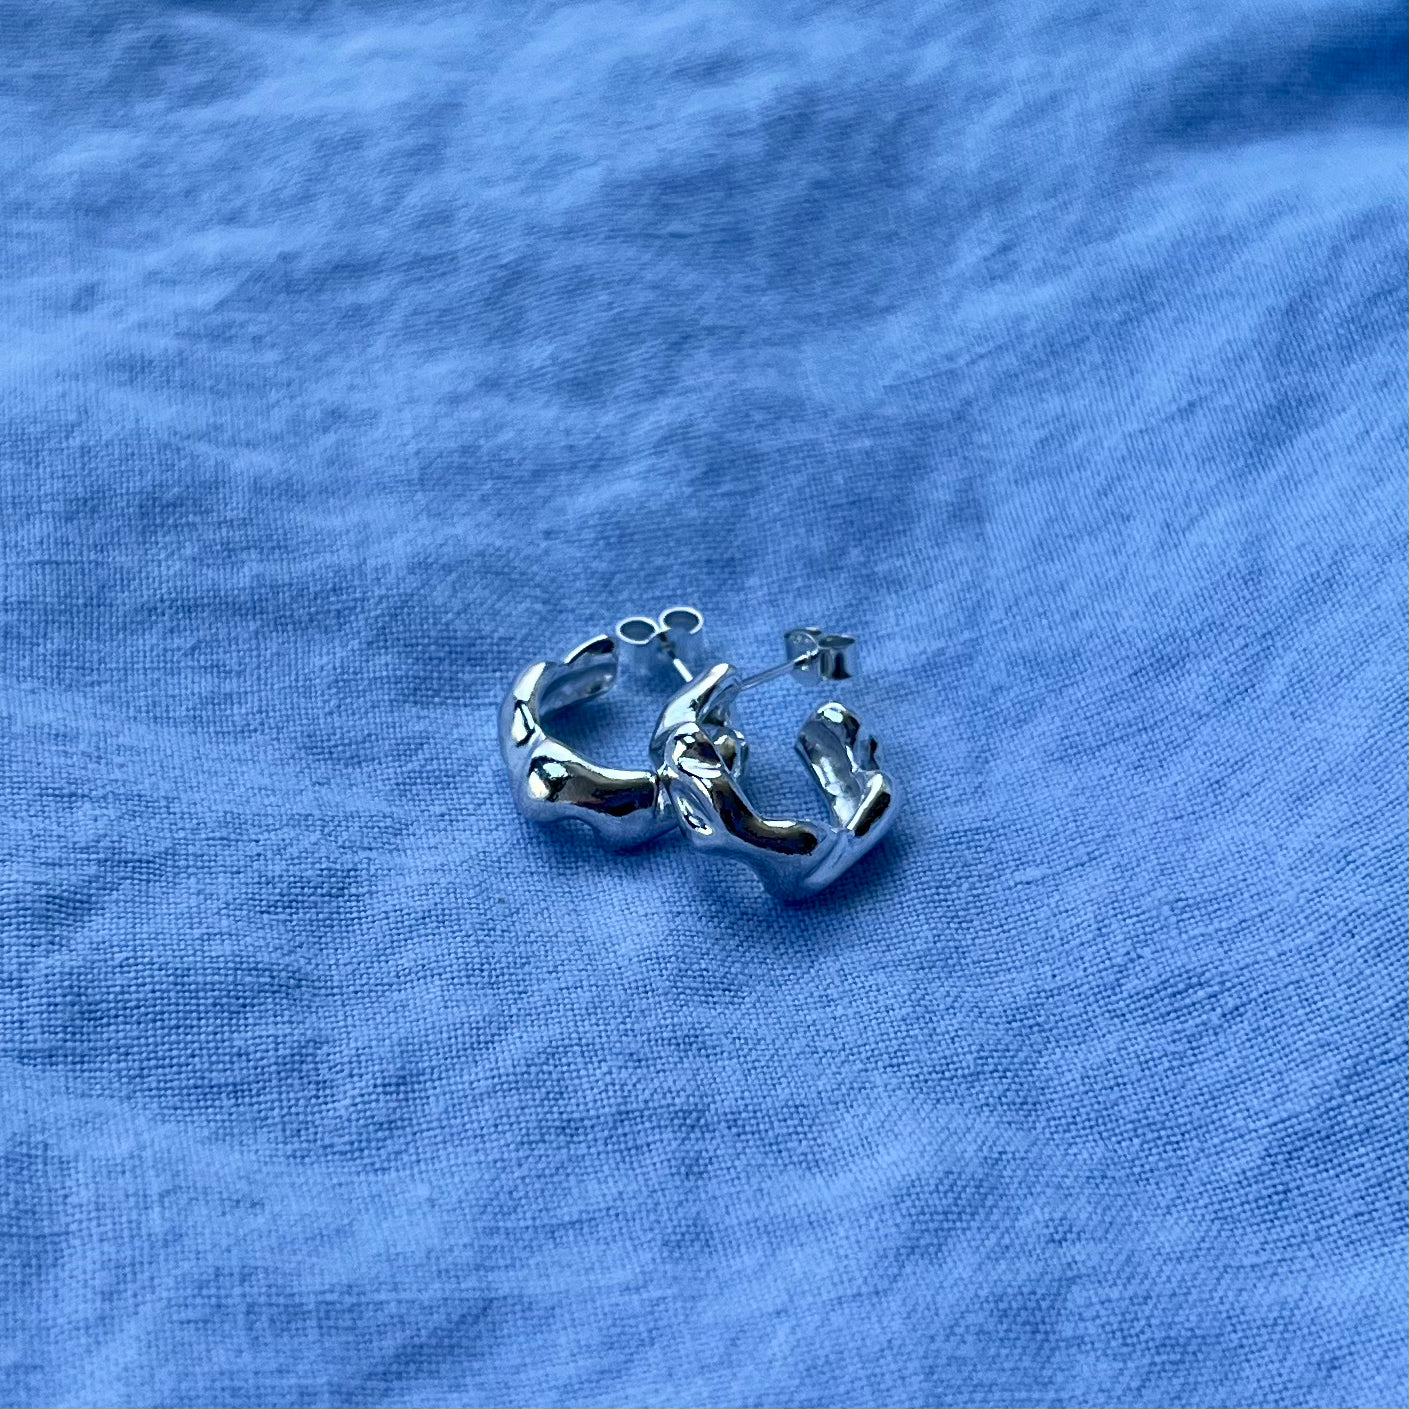 Small wavy silver earrings on a blue background.